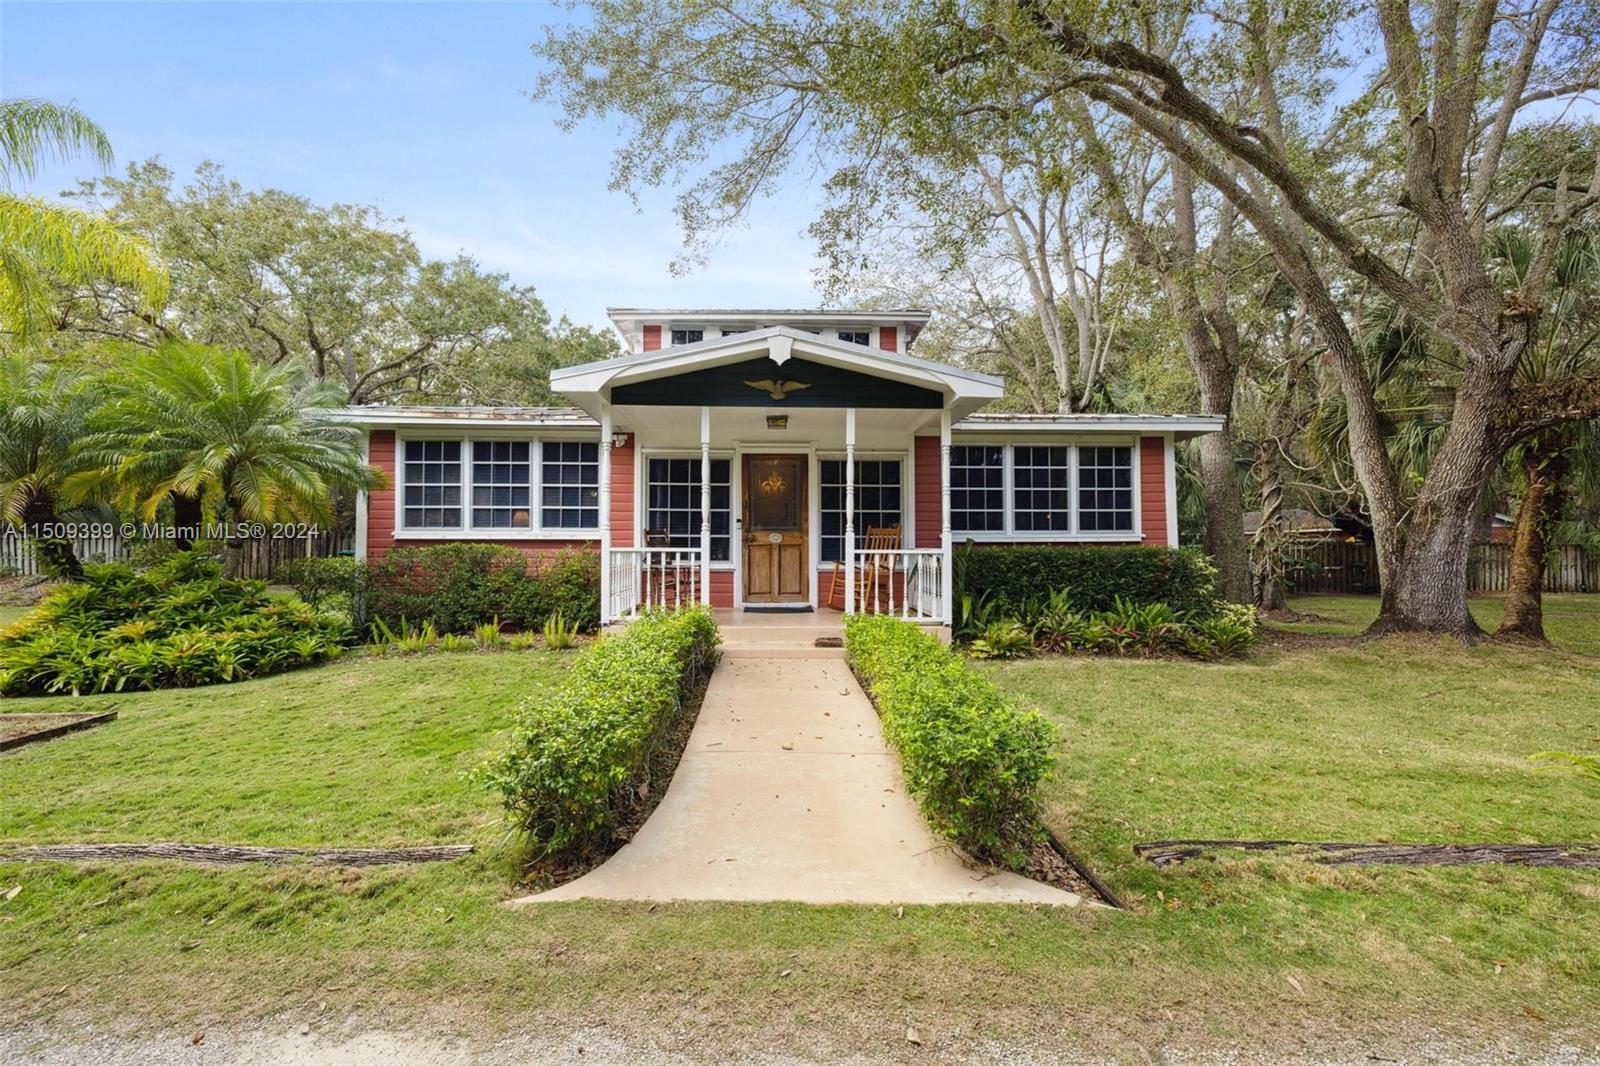 Old Florida Home on 1.92 acres in Palmetto Bay! Crown jewel looking for only its fourth homeowner ever. Improve the existing structure and enjoy all that is South Florida living. Or, build your statement home on this beautiful piece of land. Walk to Coral Reef Park, Southwood Middle School. Once in a lifetime opportunity to lay claim on a unique home and property. Great for hosting large gatherings, a pool, a chickee hut and a gorgeous yard offer quiet enjoyment. The coolest residence in Palmetto Bay makes for a complete family compound. Live, love, laugh, work from home, study at home, play and mingle with multiple generations. Plenty of room for parking your boat or RV. 5 car garage or storage, you decide. Tin roof installed after Andrew. Click tour to see the 3D virtual tour.